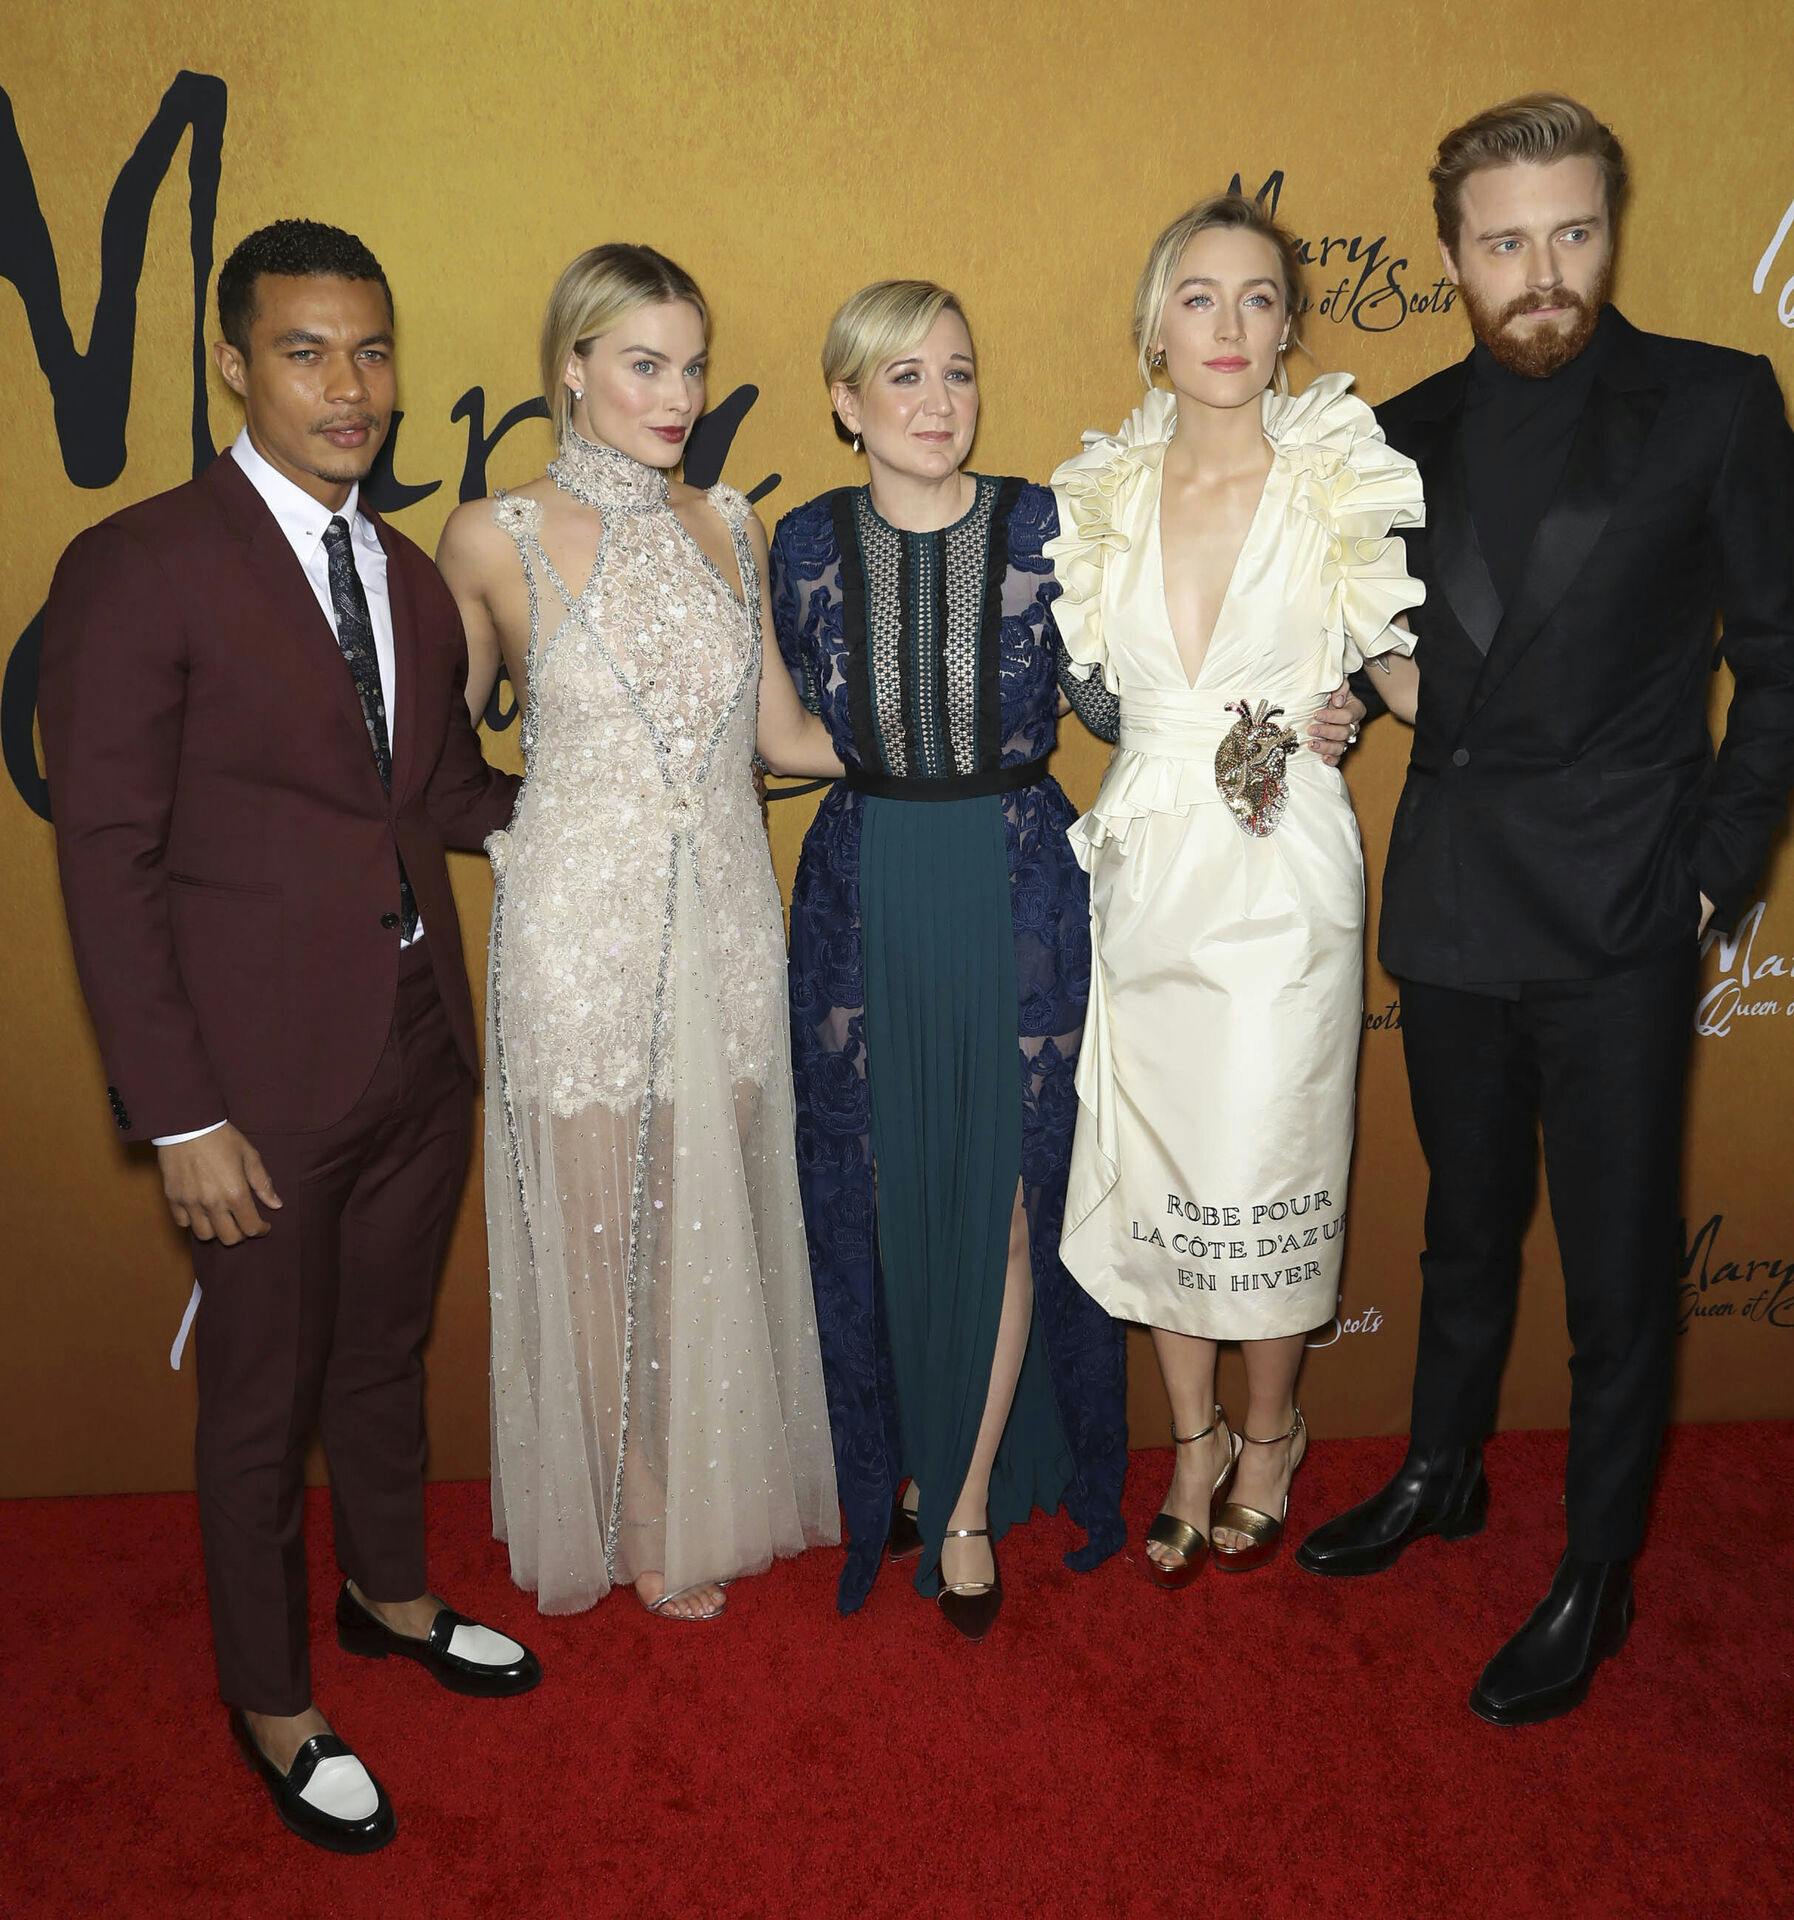 Photo by: John Nacion/STAR MAX/IPx 2018 12/4/18 Ismael Cruz Cordova, Margot Robbie, Josie Rourke, Saoirse Ronan and Jack Lowden at the premiere of "Mary Queen of Scots" in New York City.